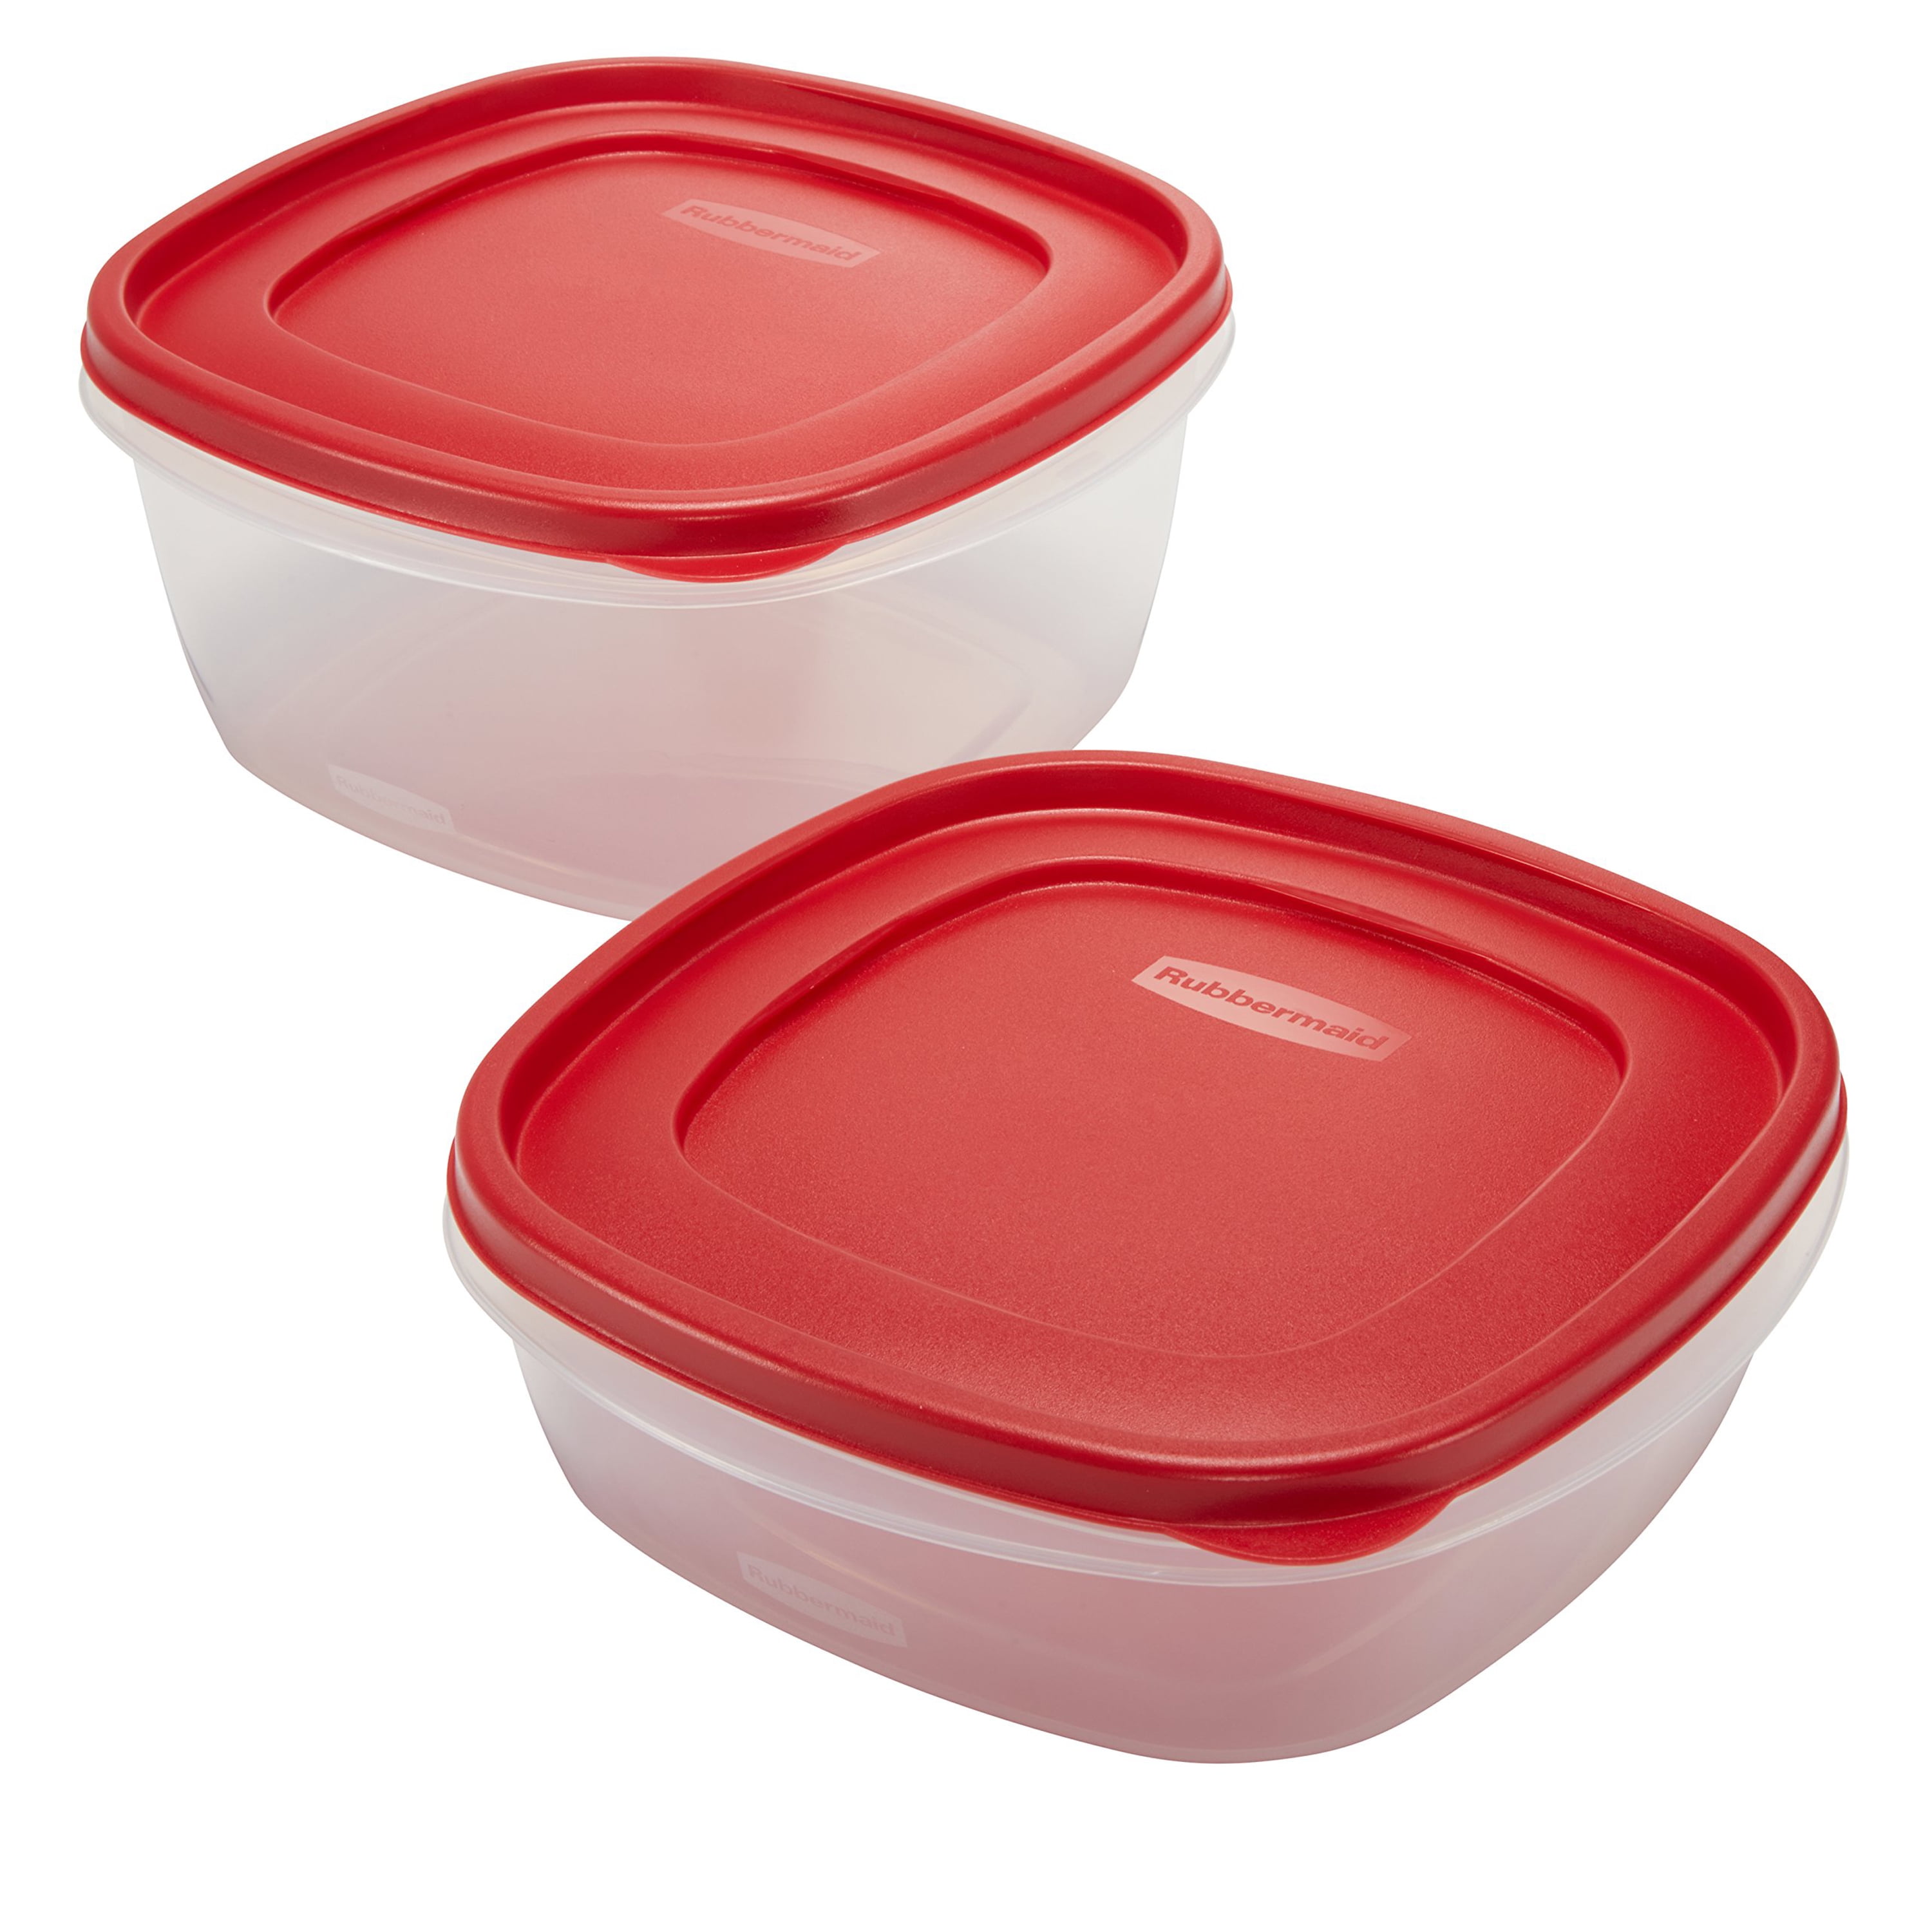 Rubbermaid, Kitchen, Rubbermaid Premier Resists Stains Scroll Design 4  Cups Easy Find Lid